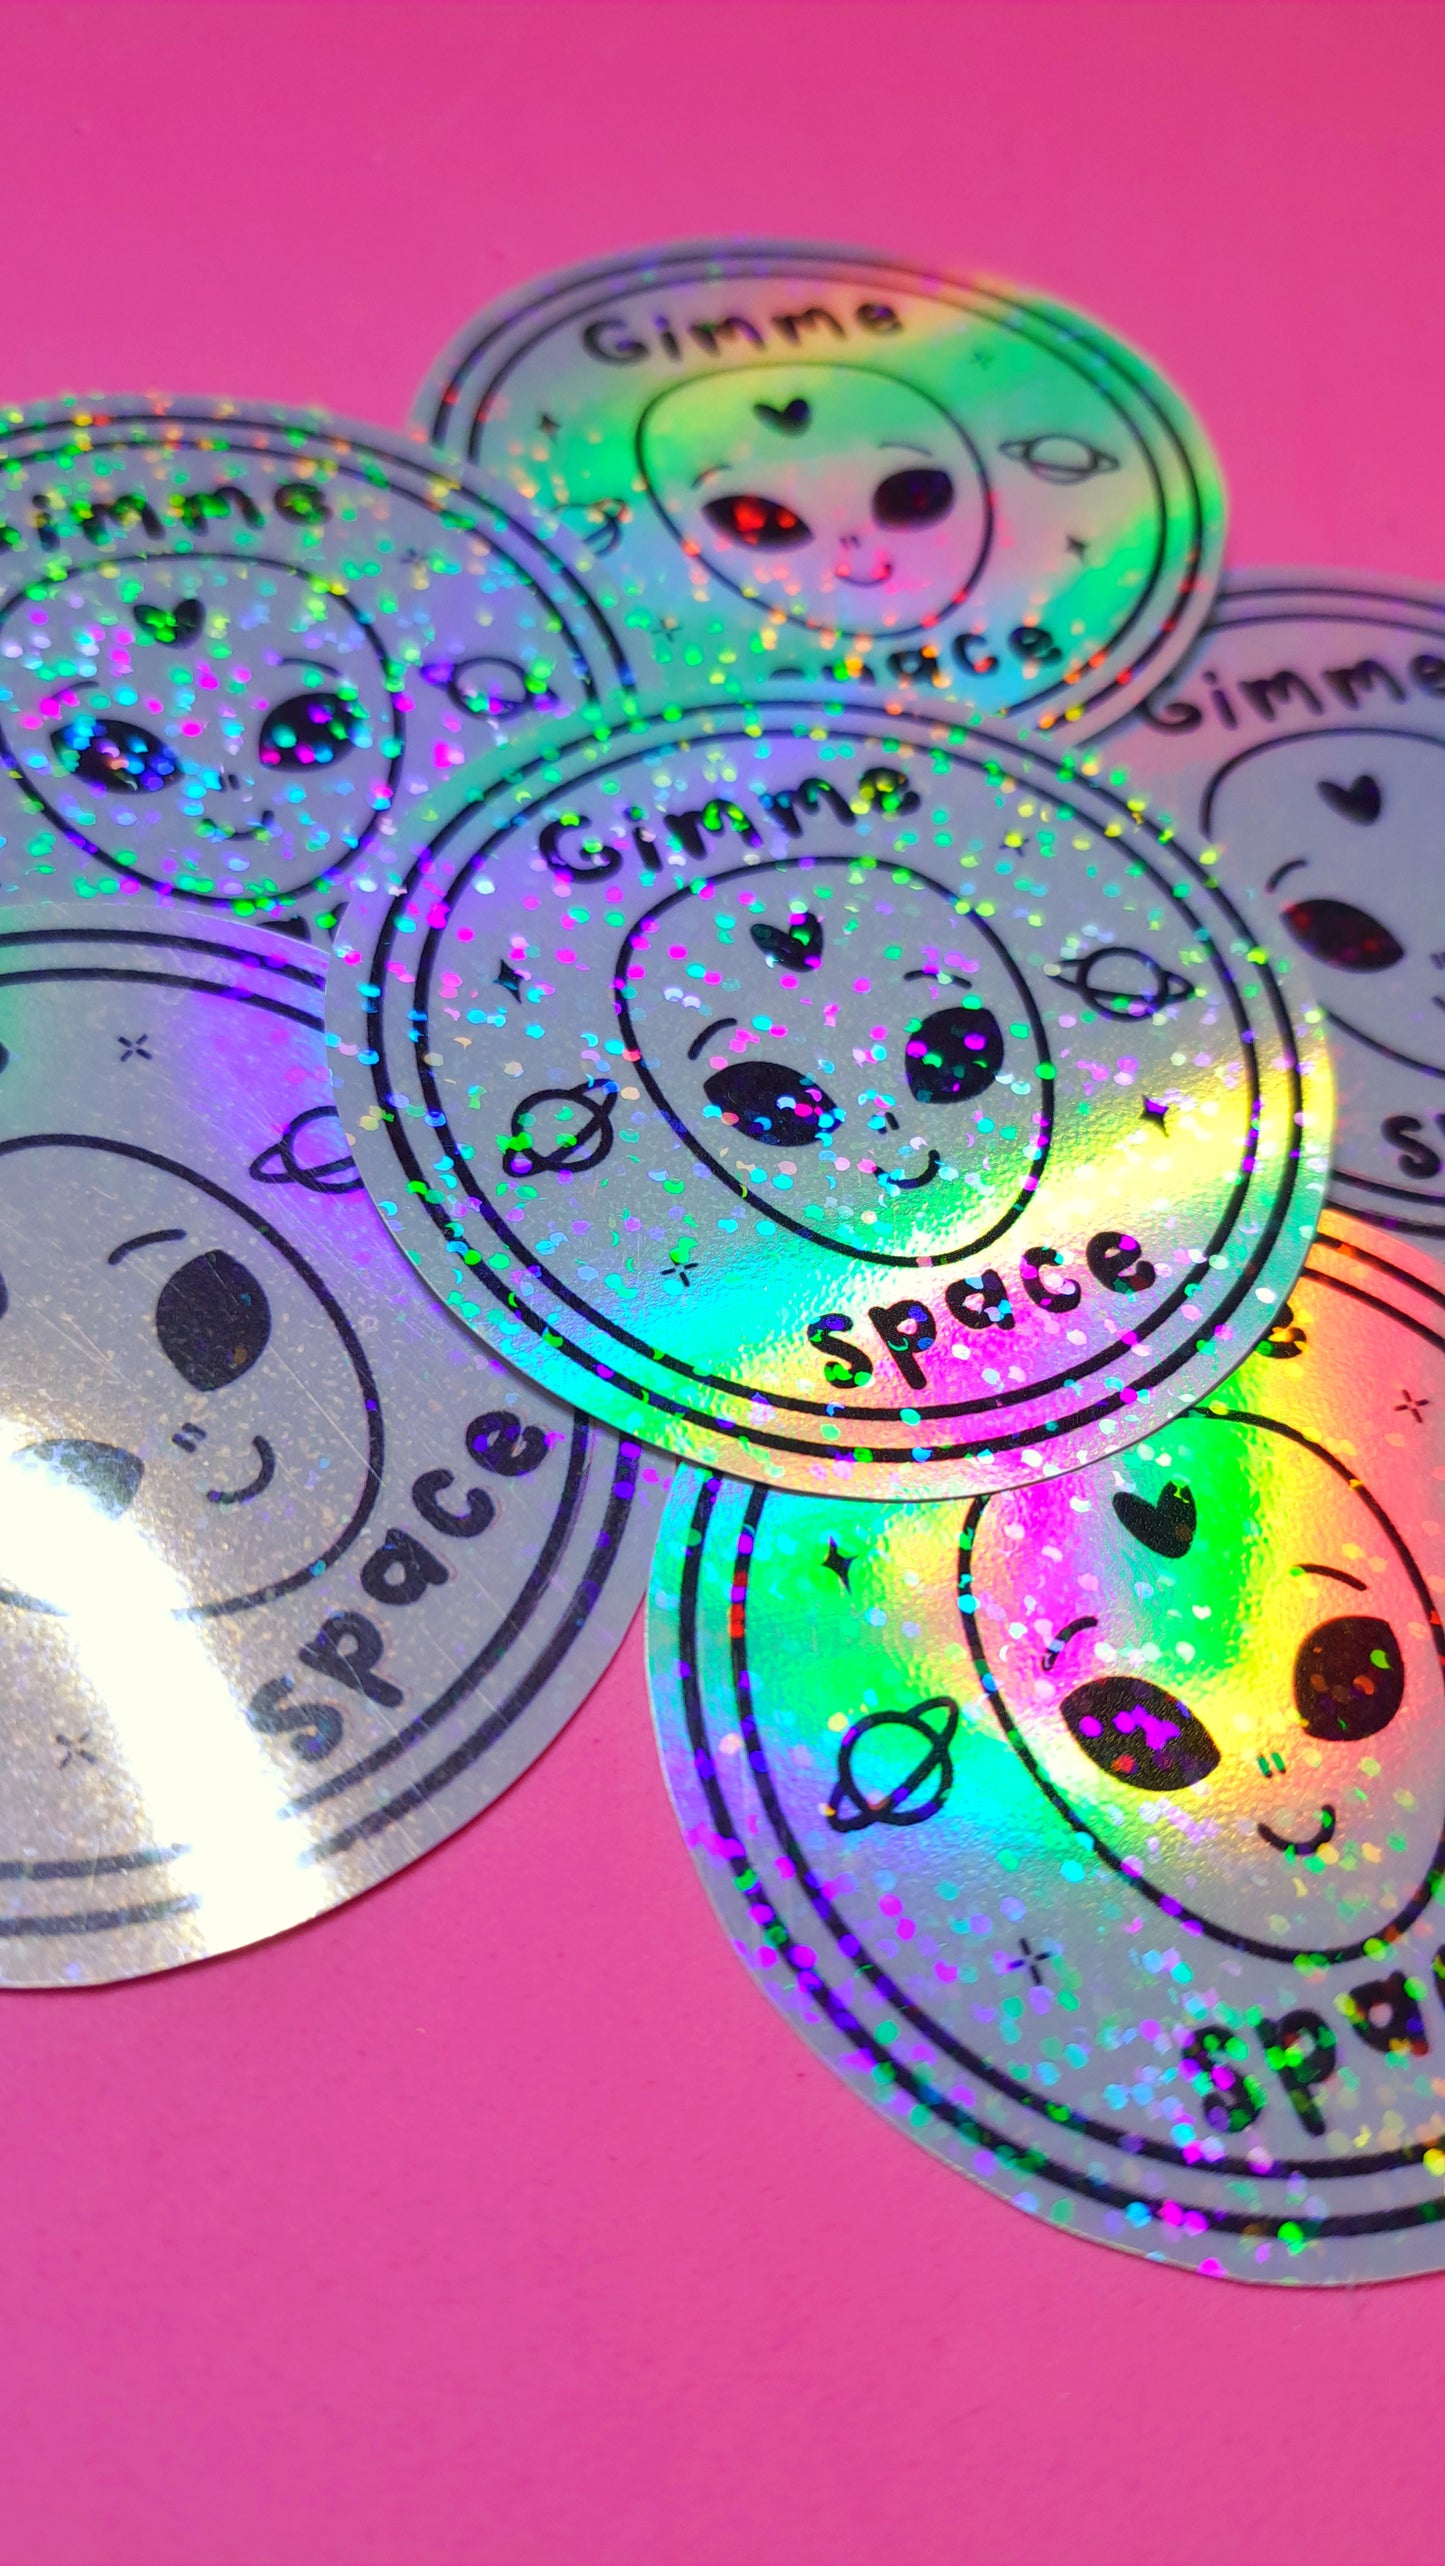 Gimme Space Sticker